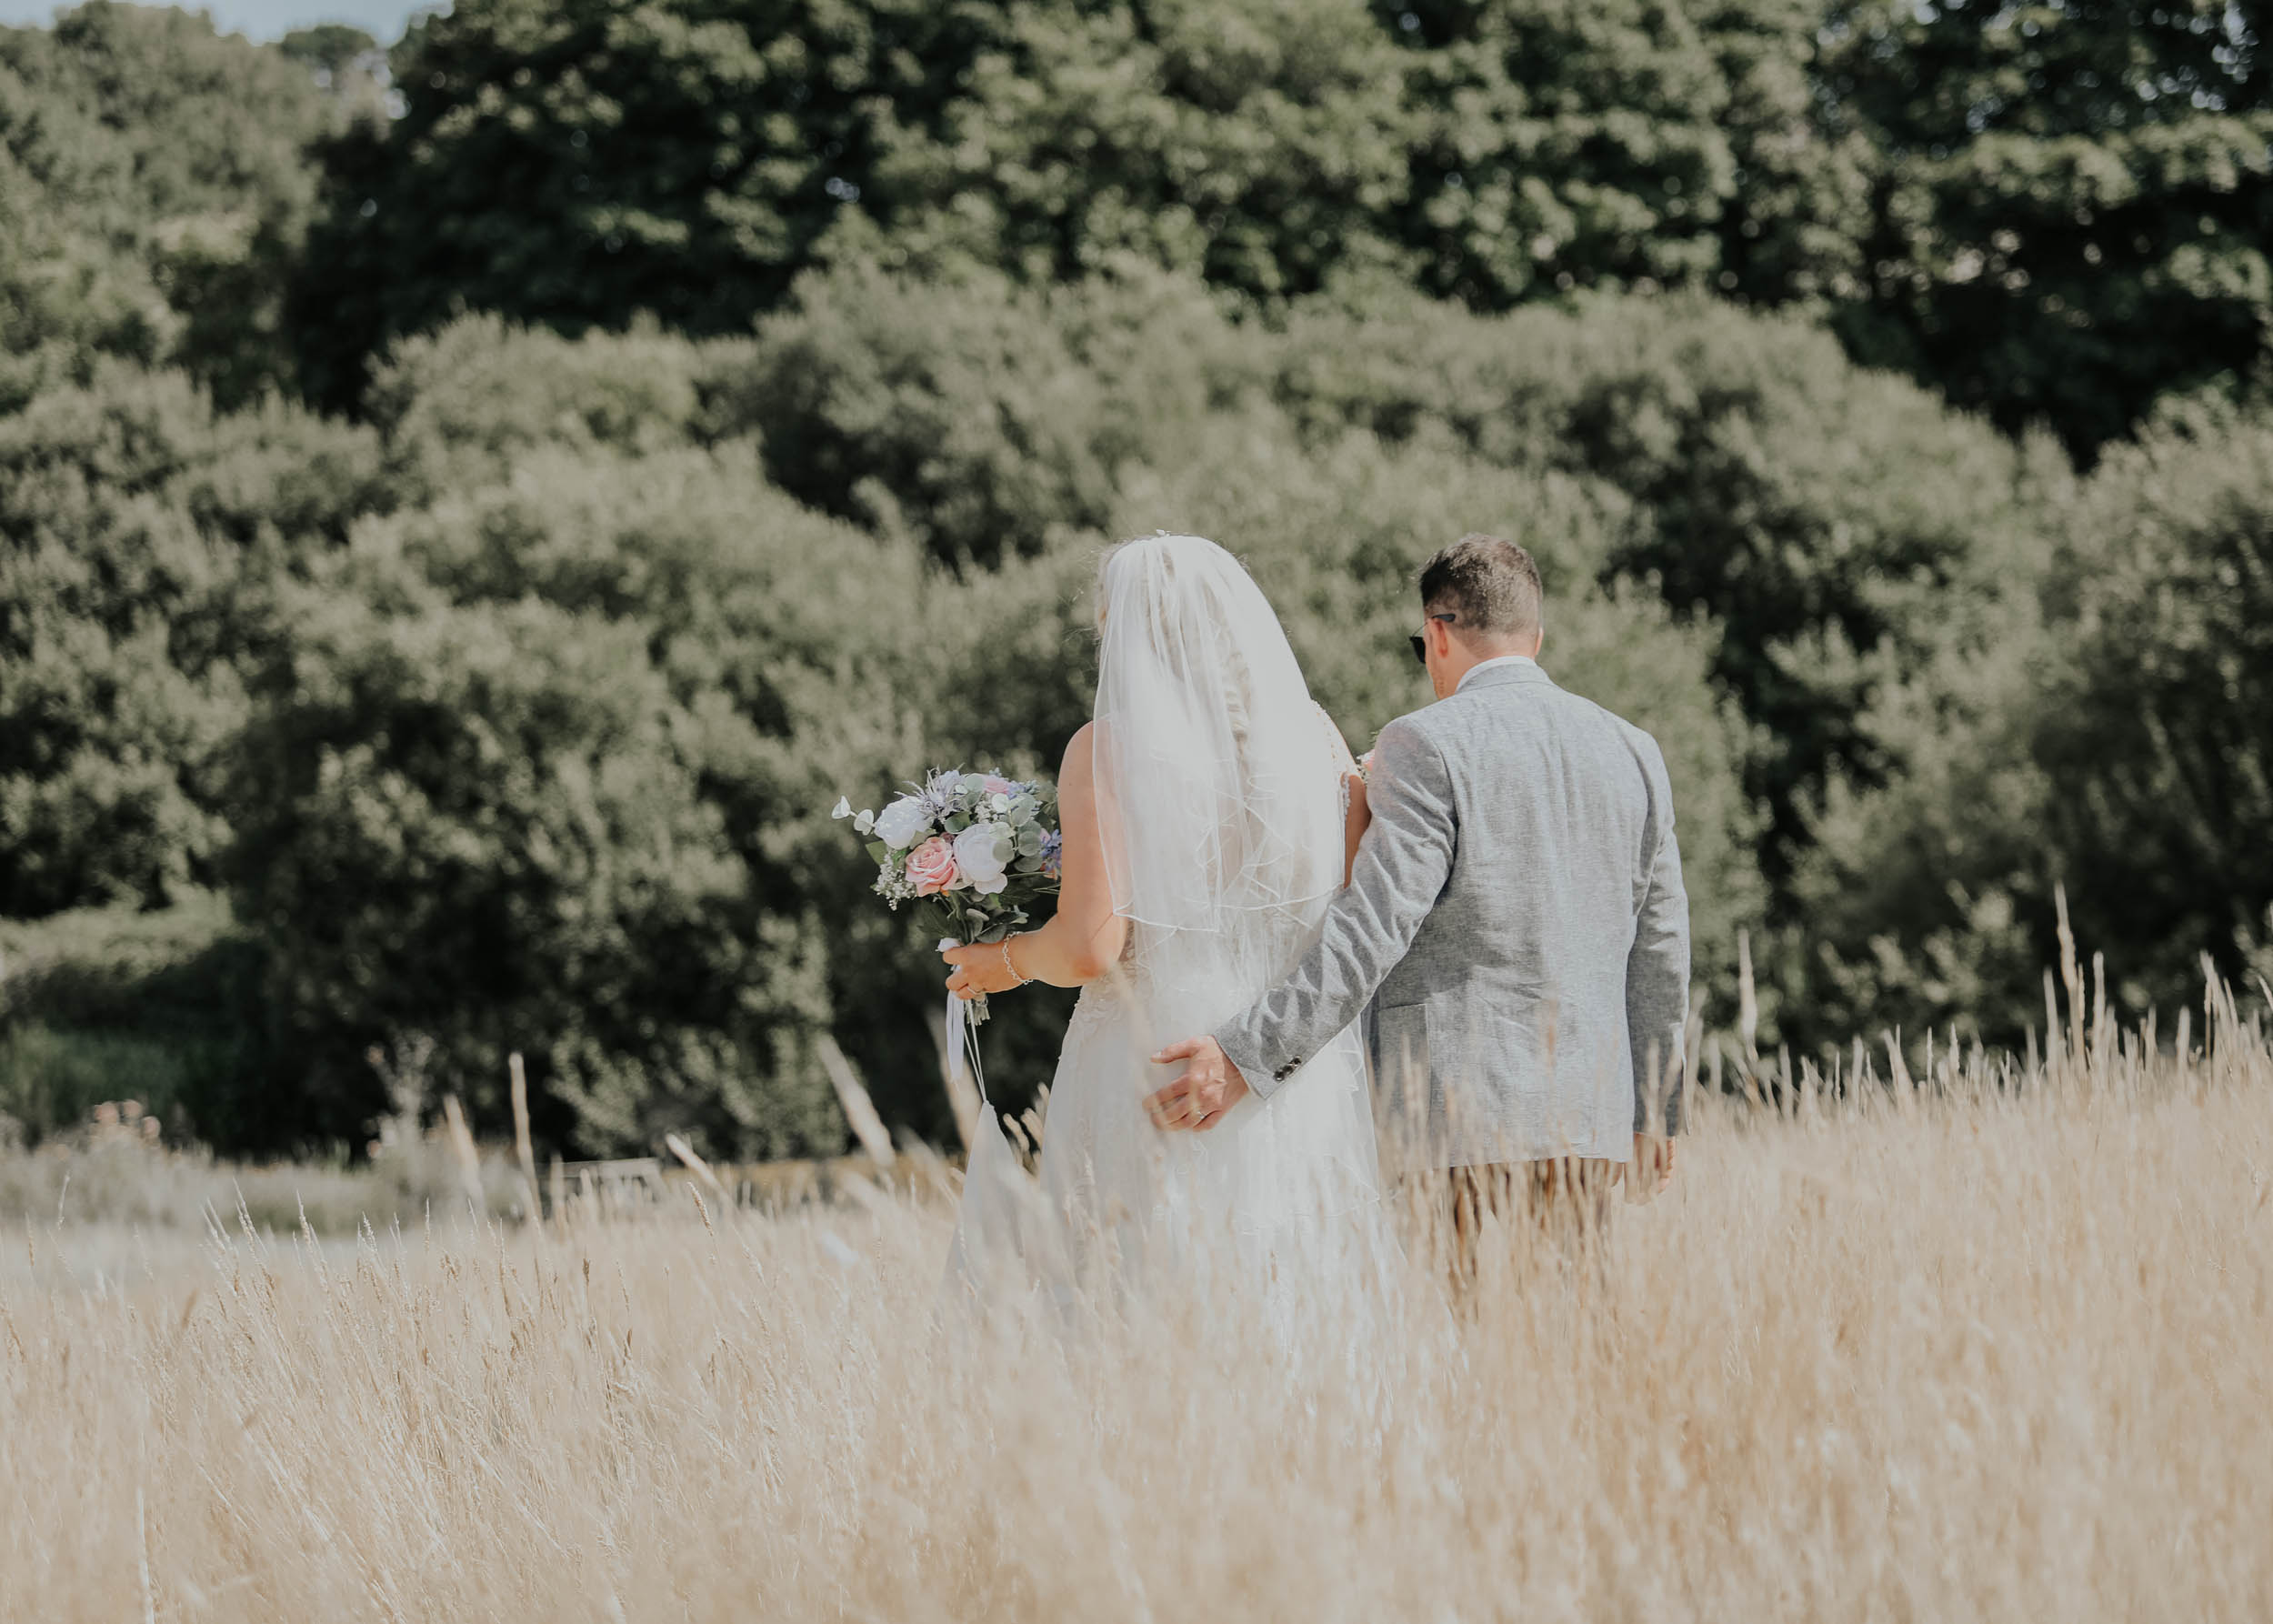 Newlyweds walking away from the camera through a corn field